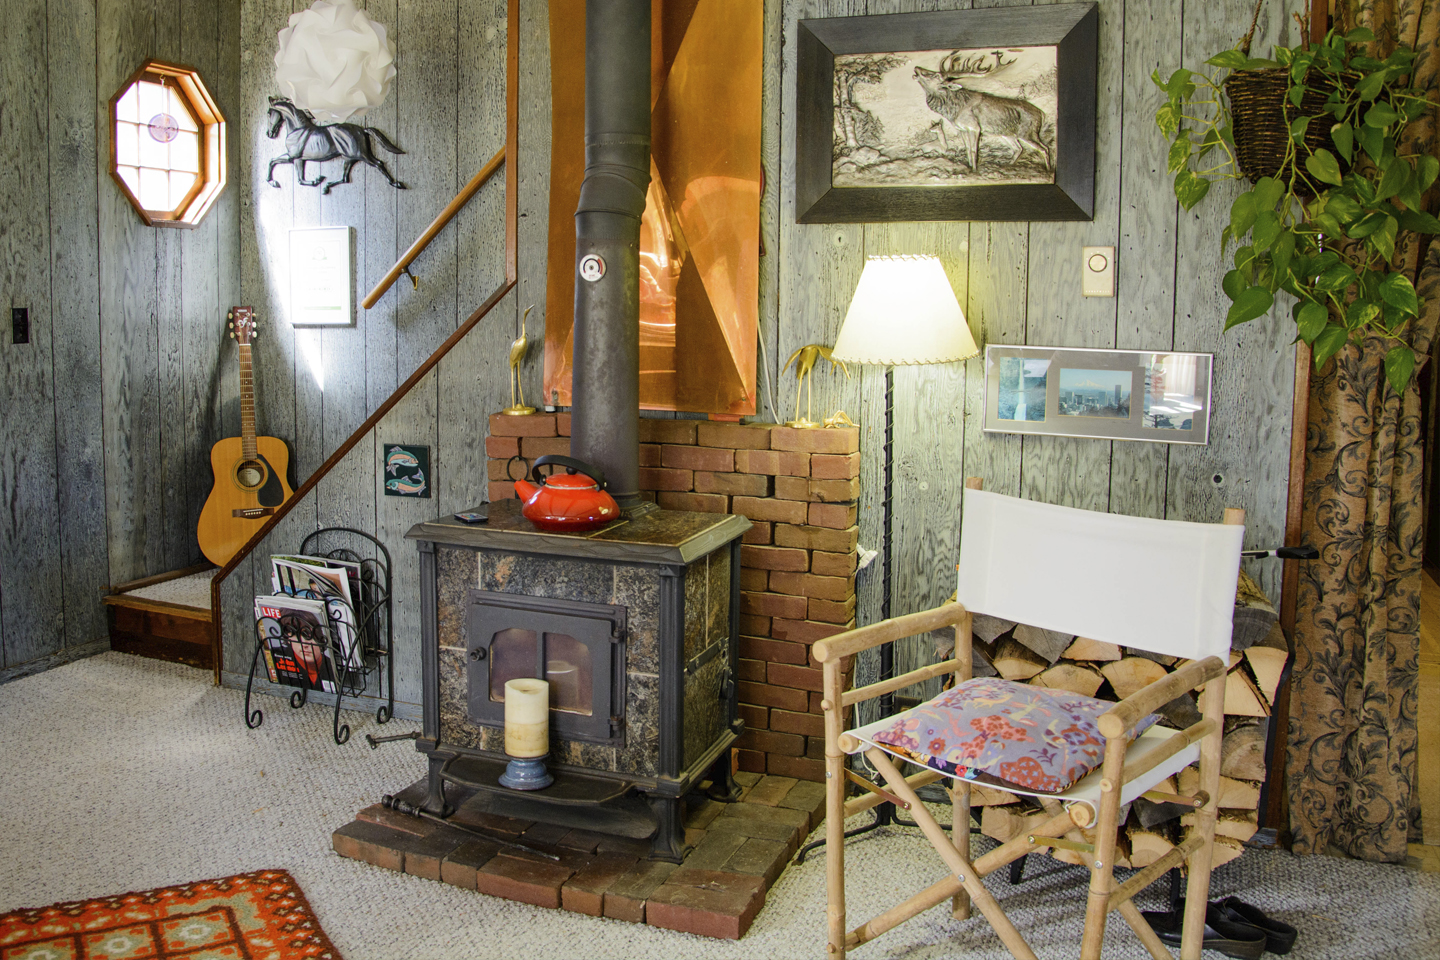 The Great Room's wood stove